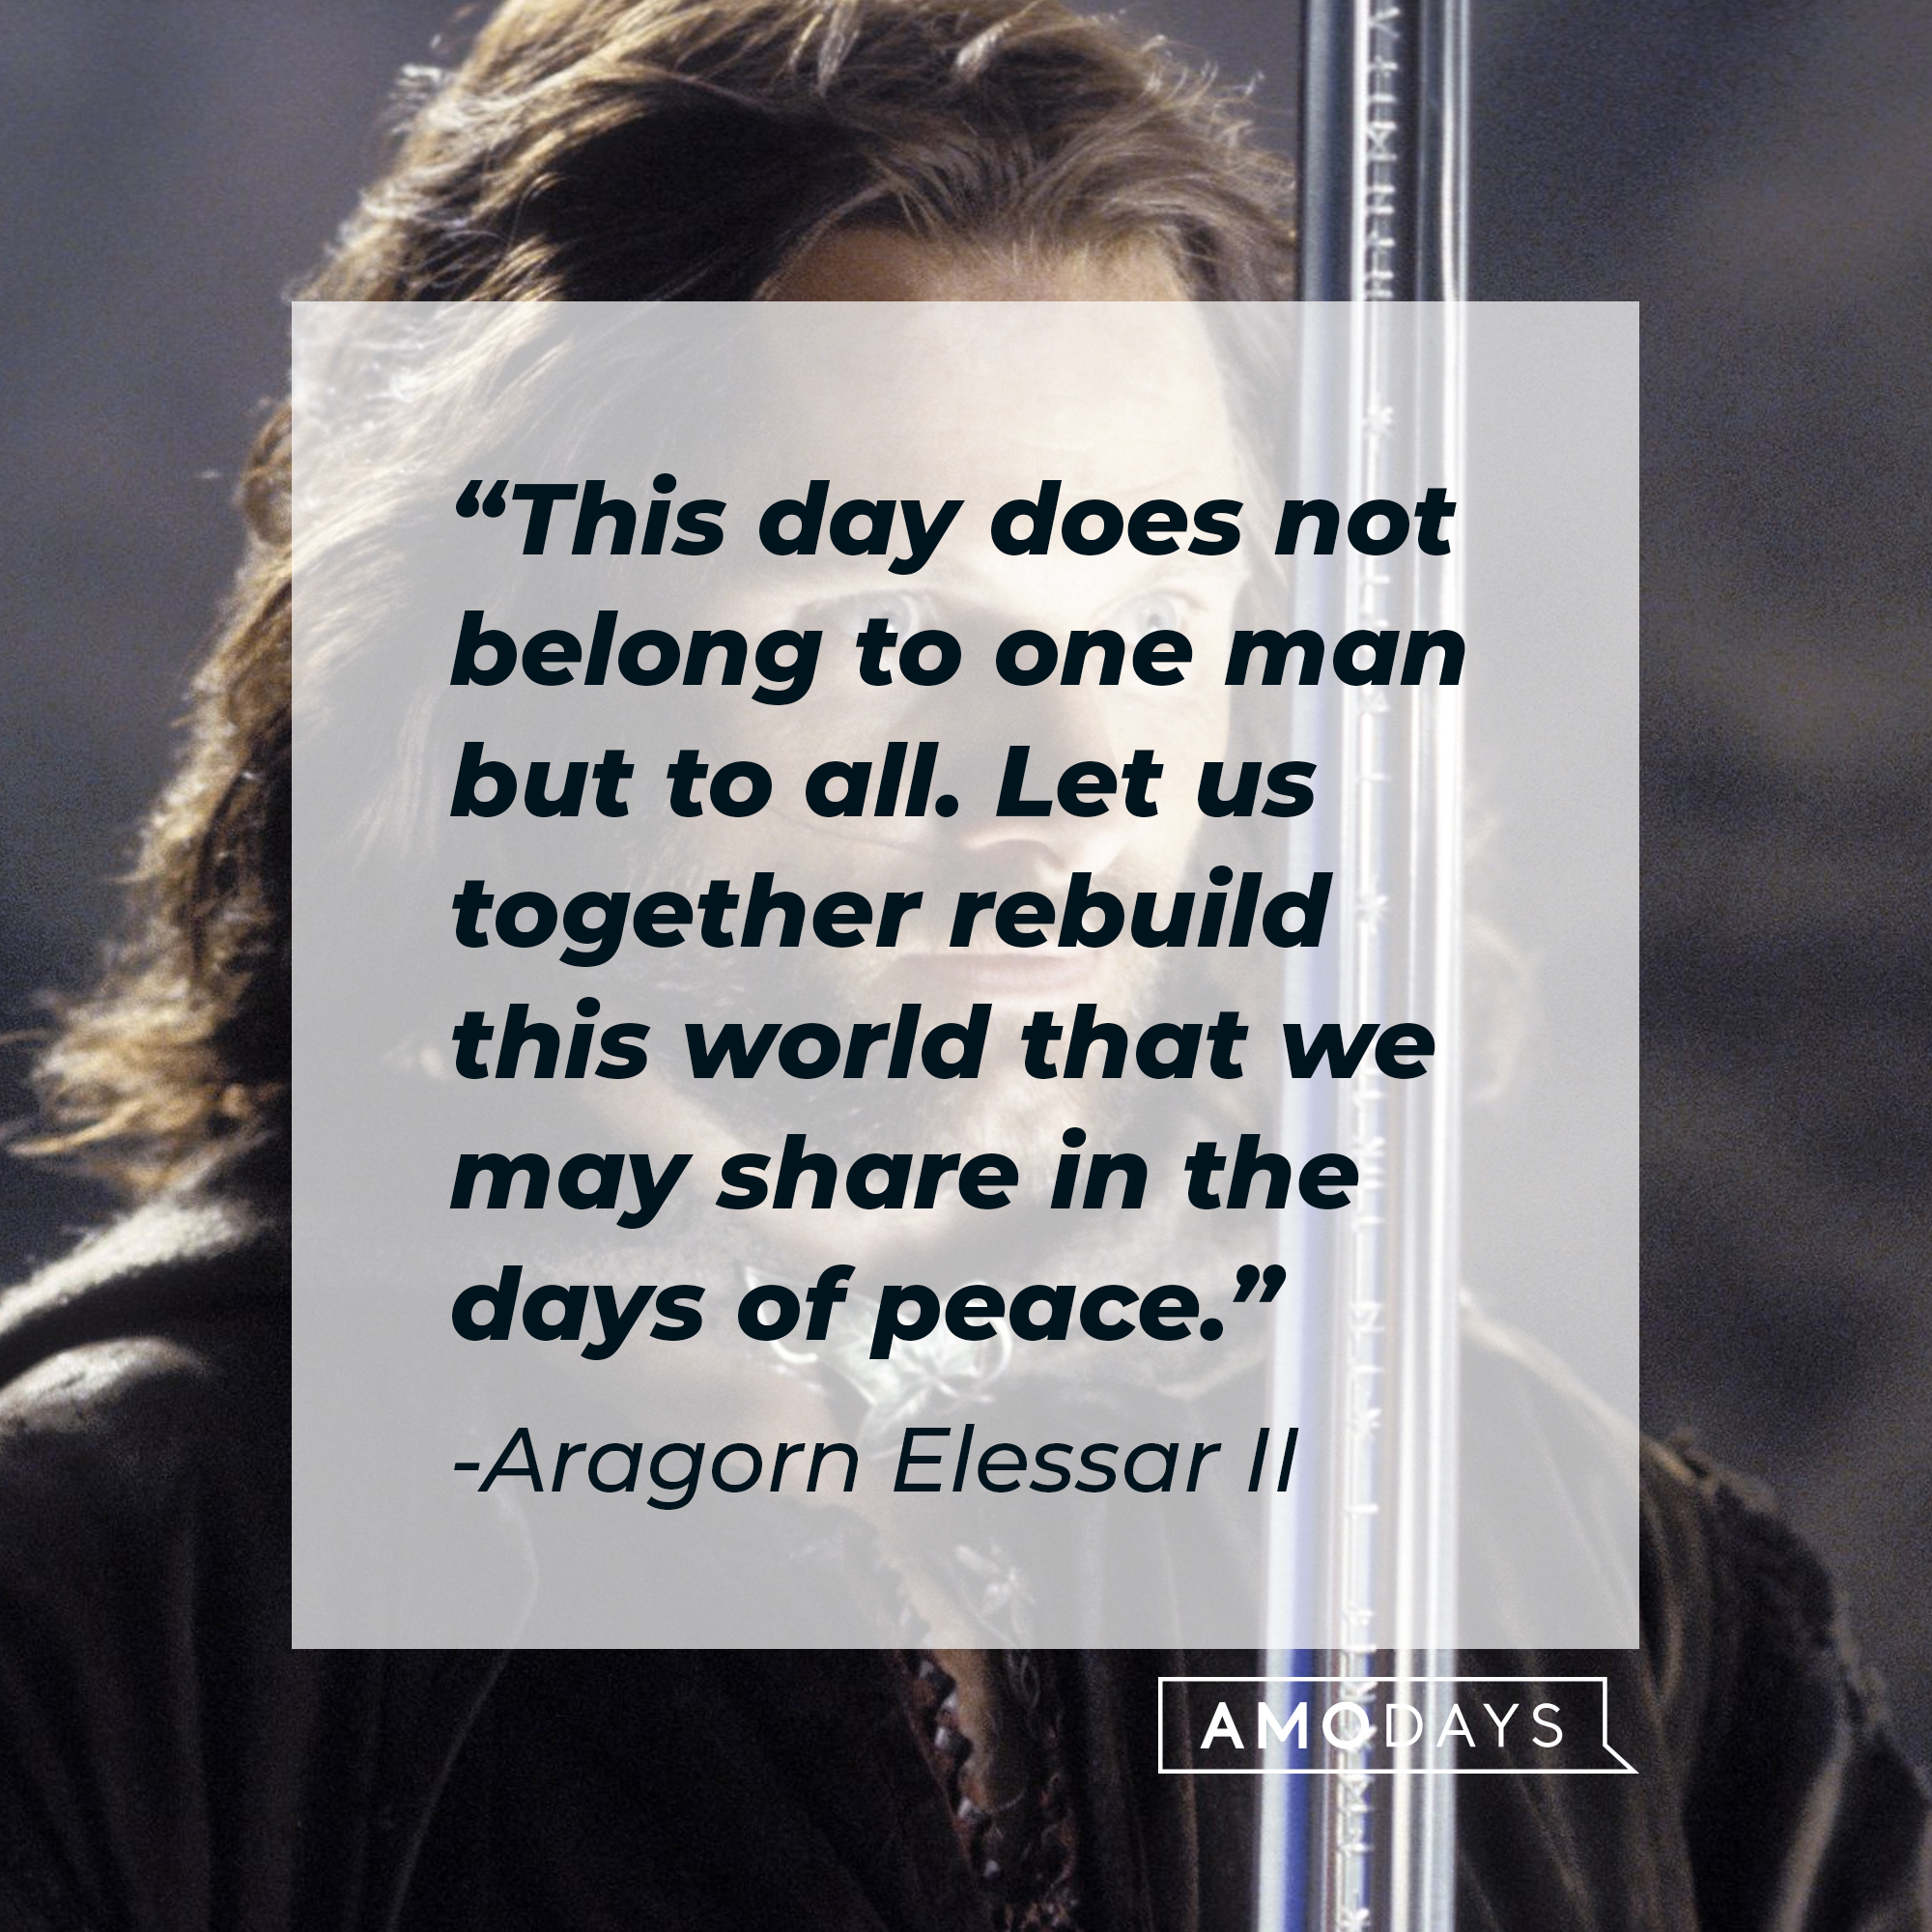 Aragorn Elessar II with his quote from "The Lord of the Rings:" "This day does not belong to one man but to all. Let us together rebuild this world that we may share in the days of peace." | Source: Facebook/lordoftheringstrilogy